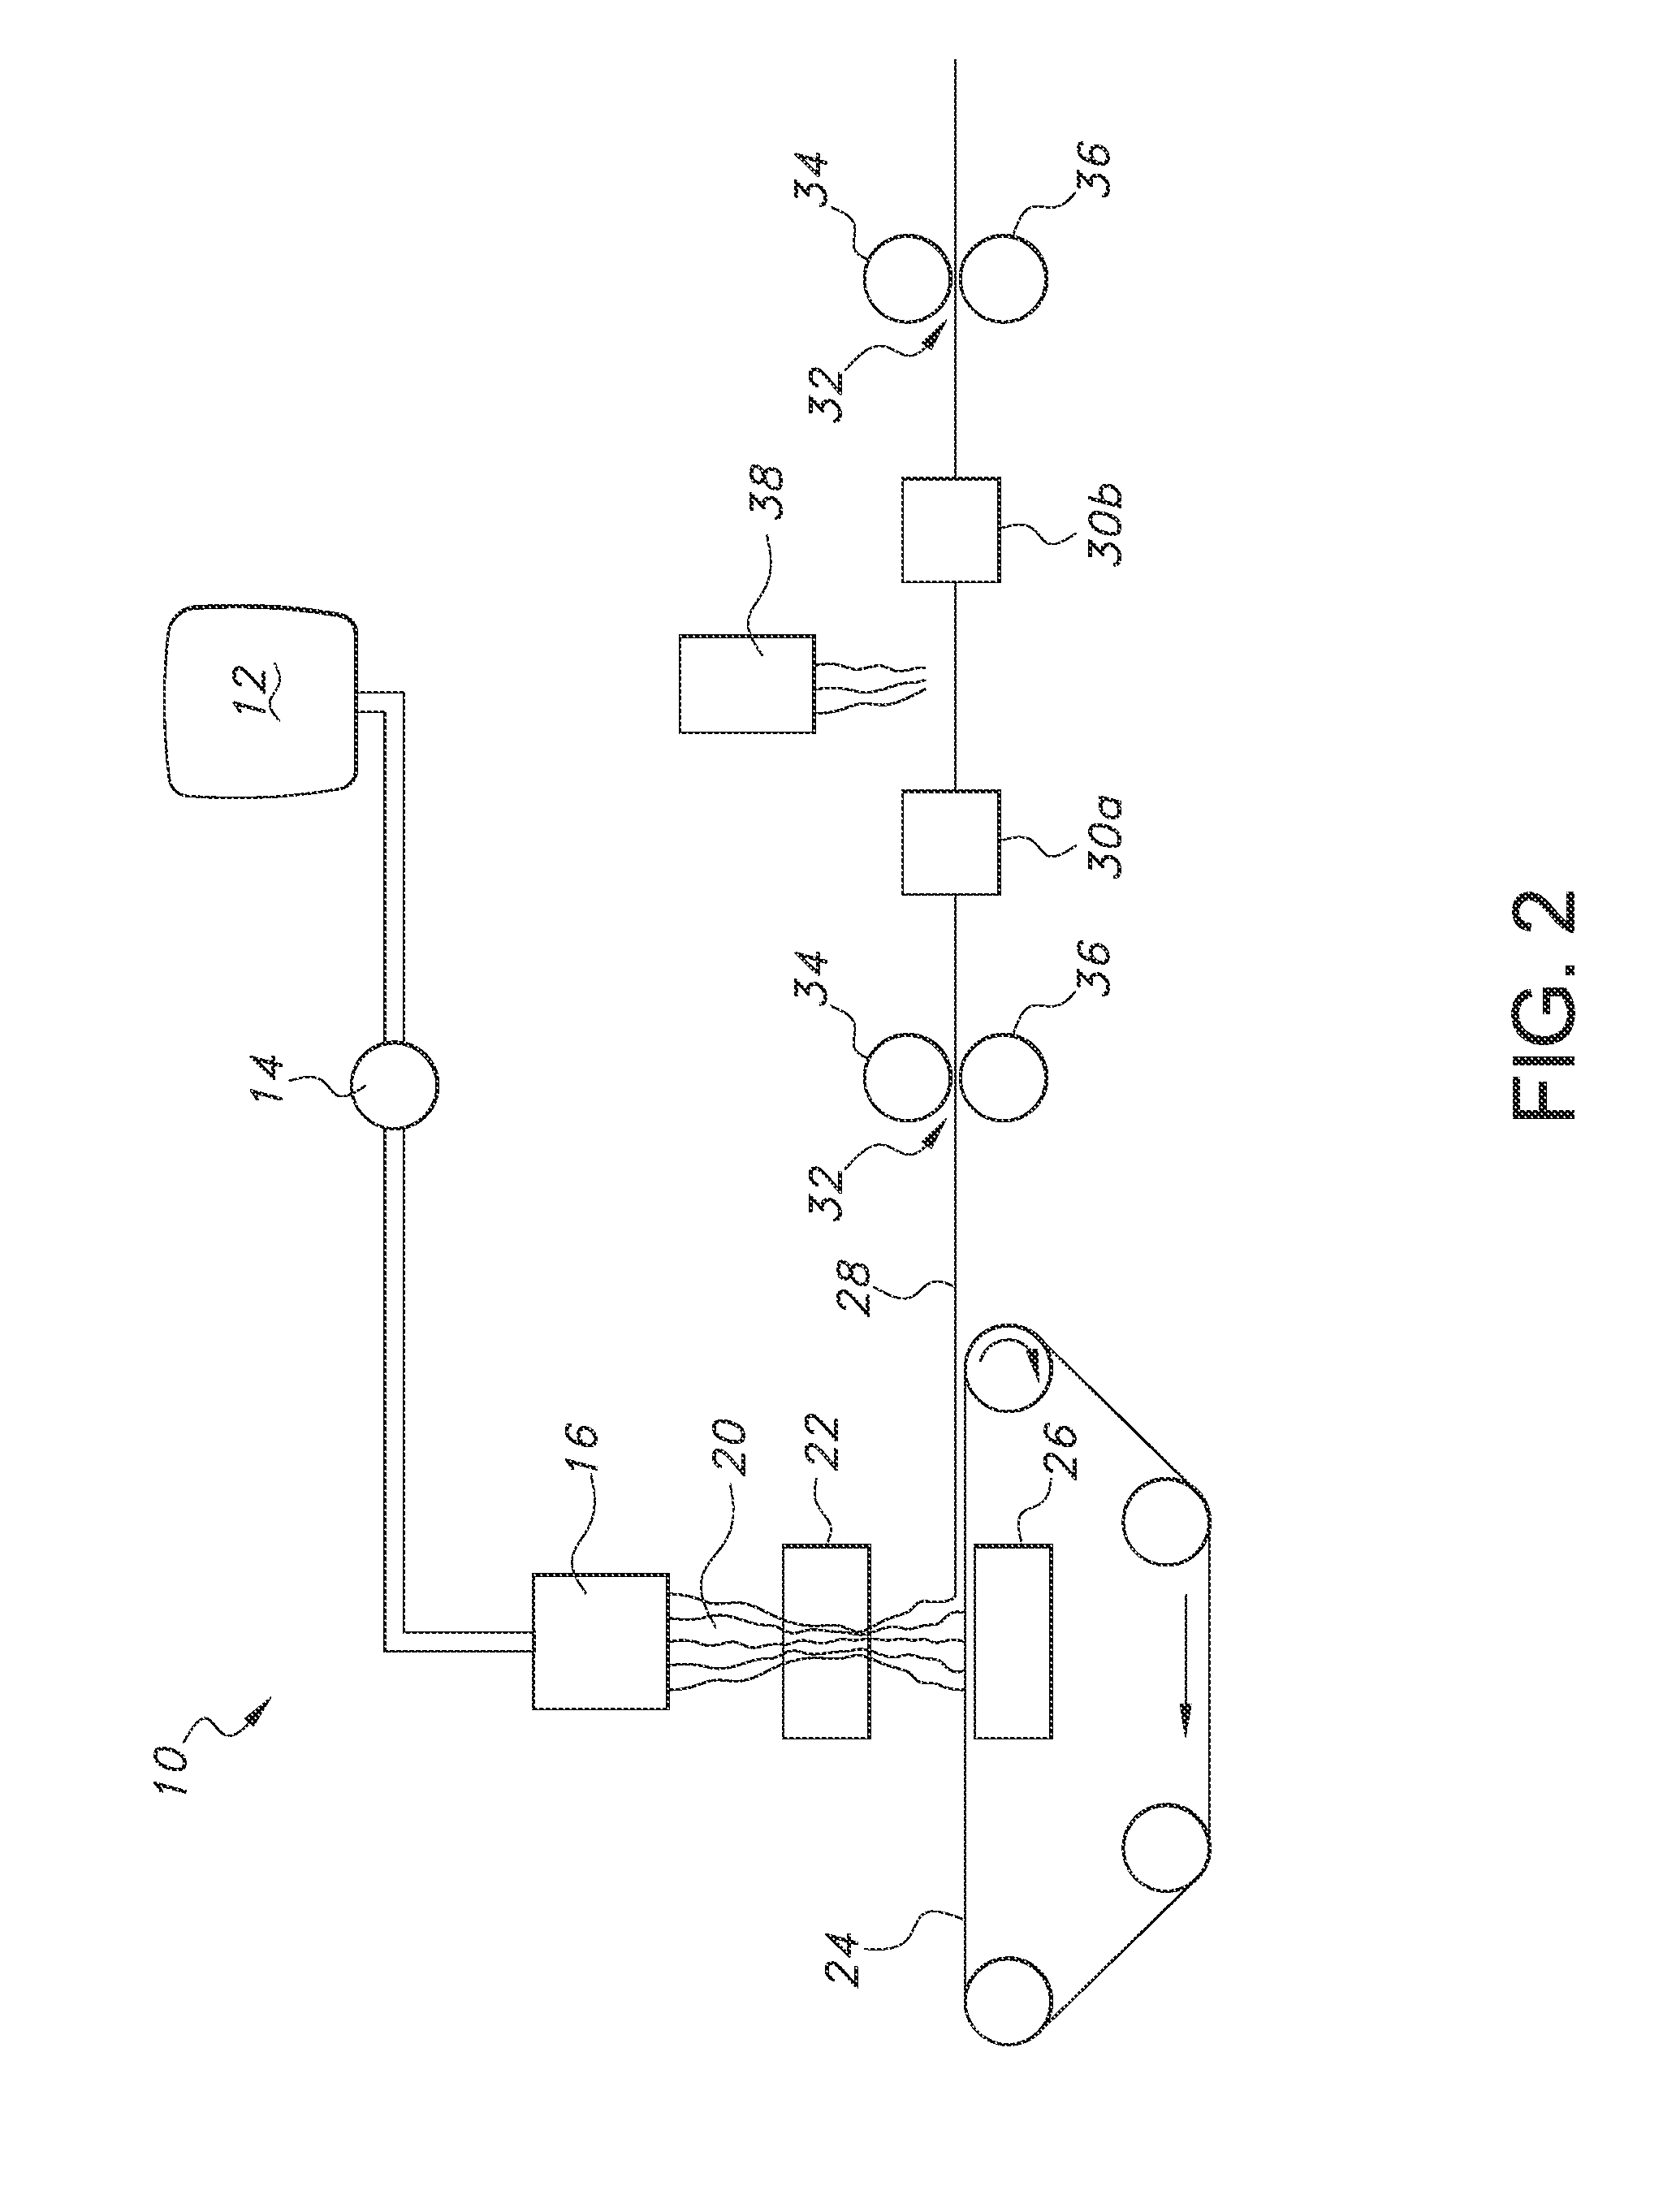 Filaments Comprising Microfibrillar Cellulose, Fibrous Nonwoven Webs and Process for Making the Same